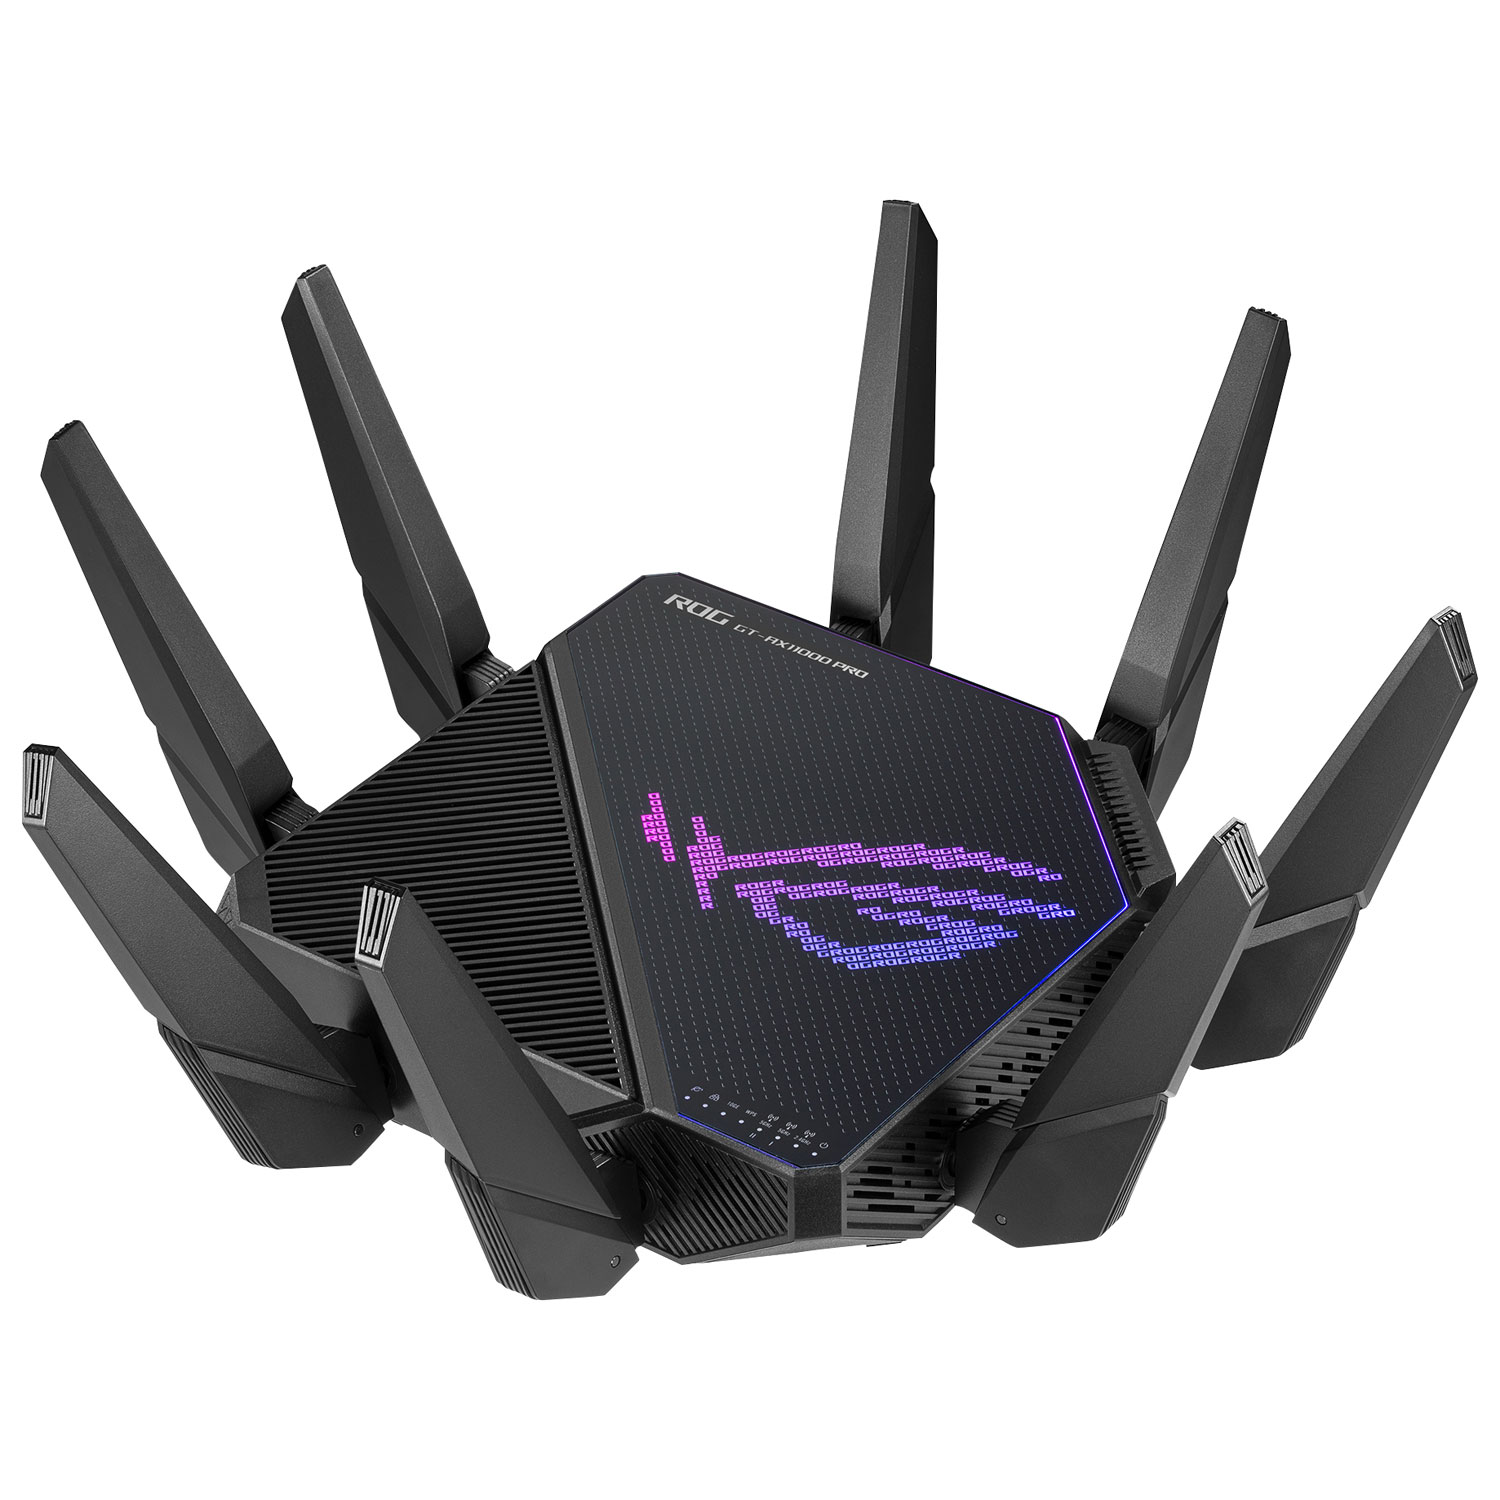 ASUS ROG Rapture Wireless AX11000 Tri-Band Wi-Fi 6 Router (GT-AX11000 Pro)